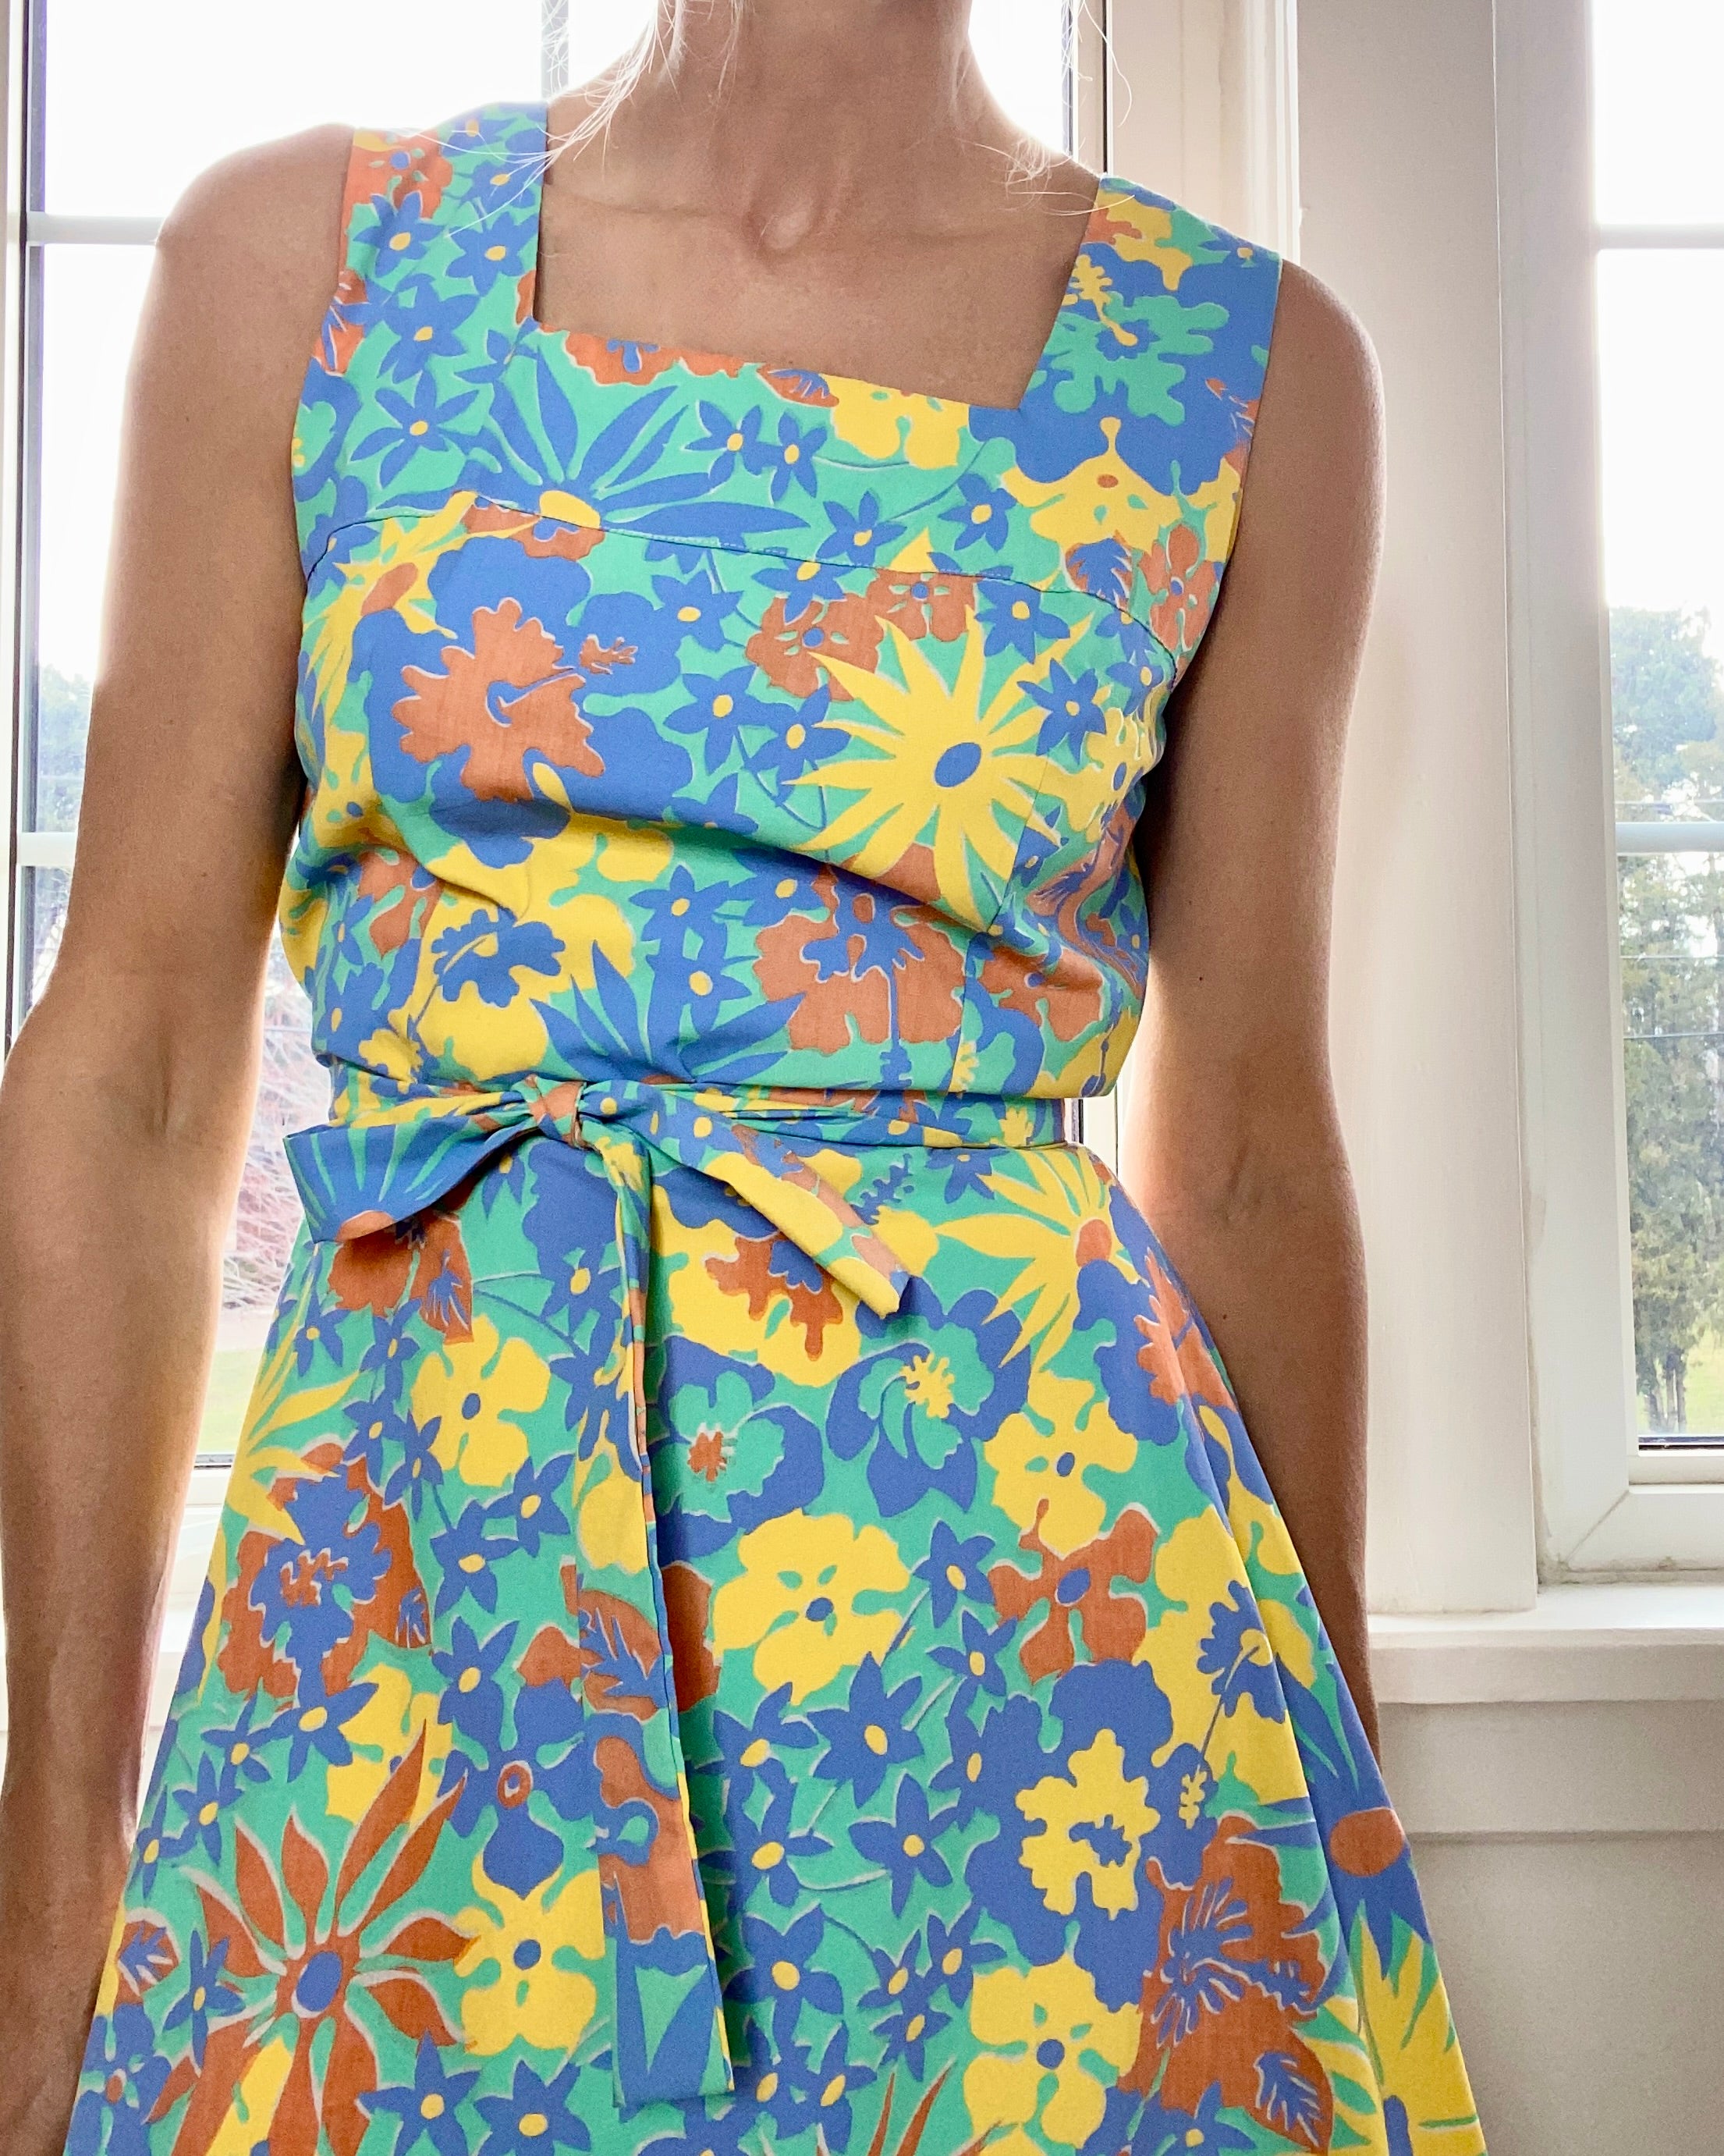 Vintage 1960s Ruth Clarage Tropical Print Day Dress Made in Jamaica